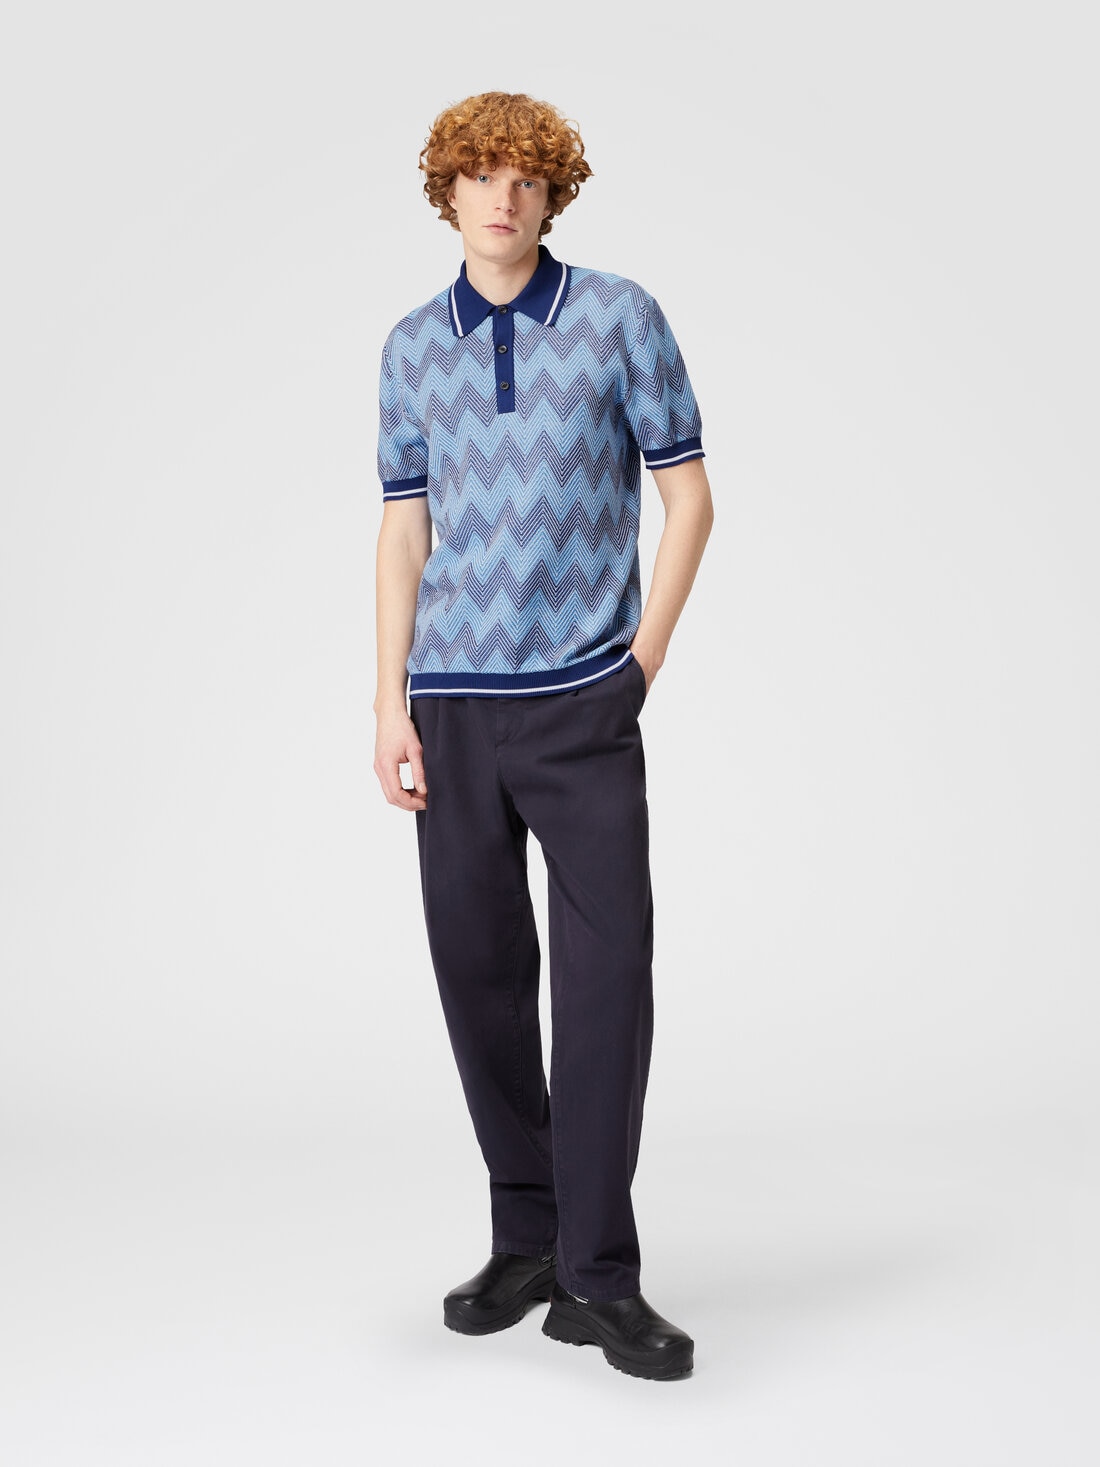 Short-sleeved polo shirt in zigzag cotton with contrasting trim, Blue - US24S209BK034YS72F8 - 1